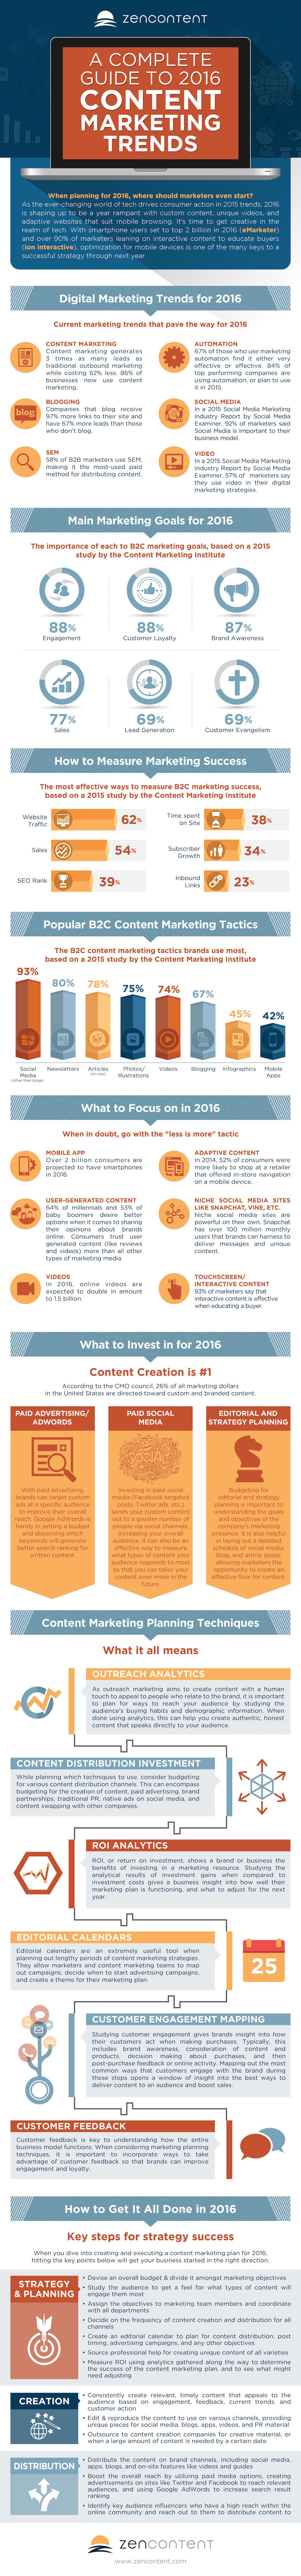 A Complete Guide to 2016 Content Marketing Trends